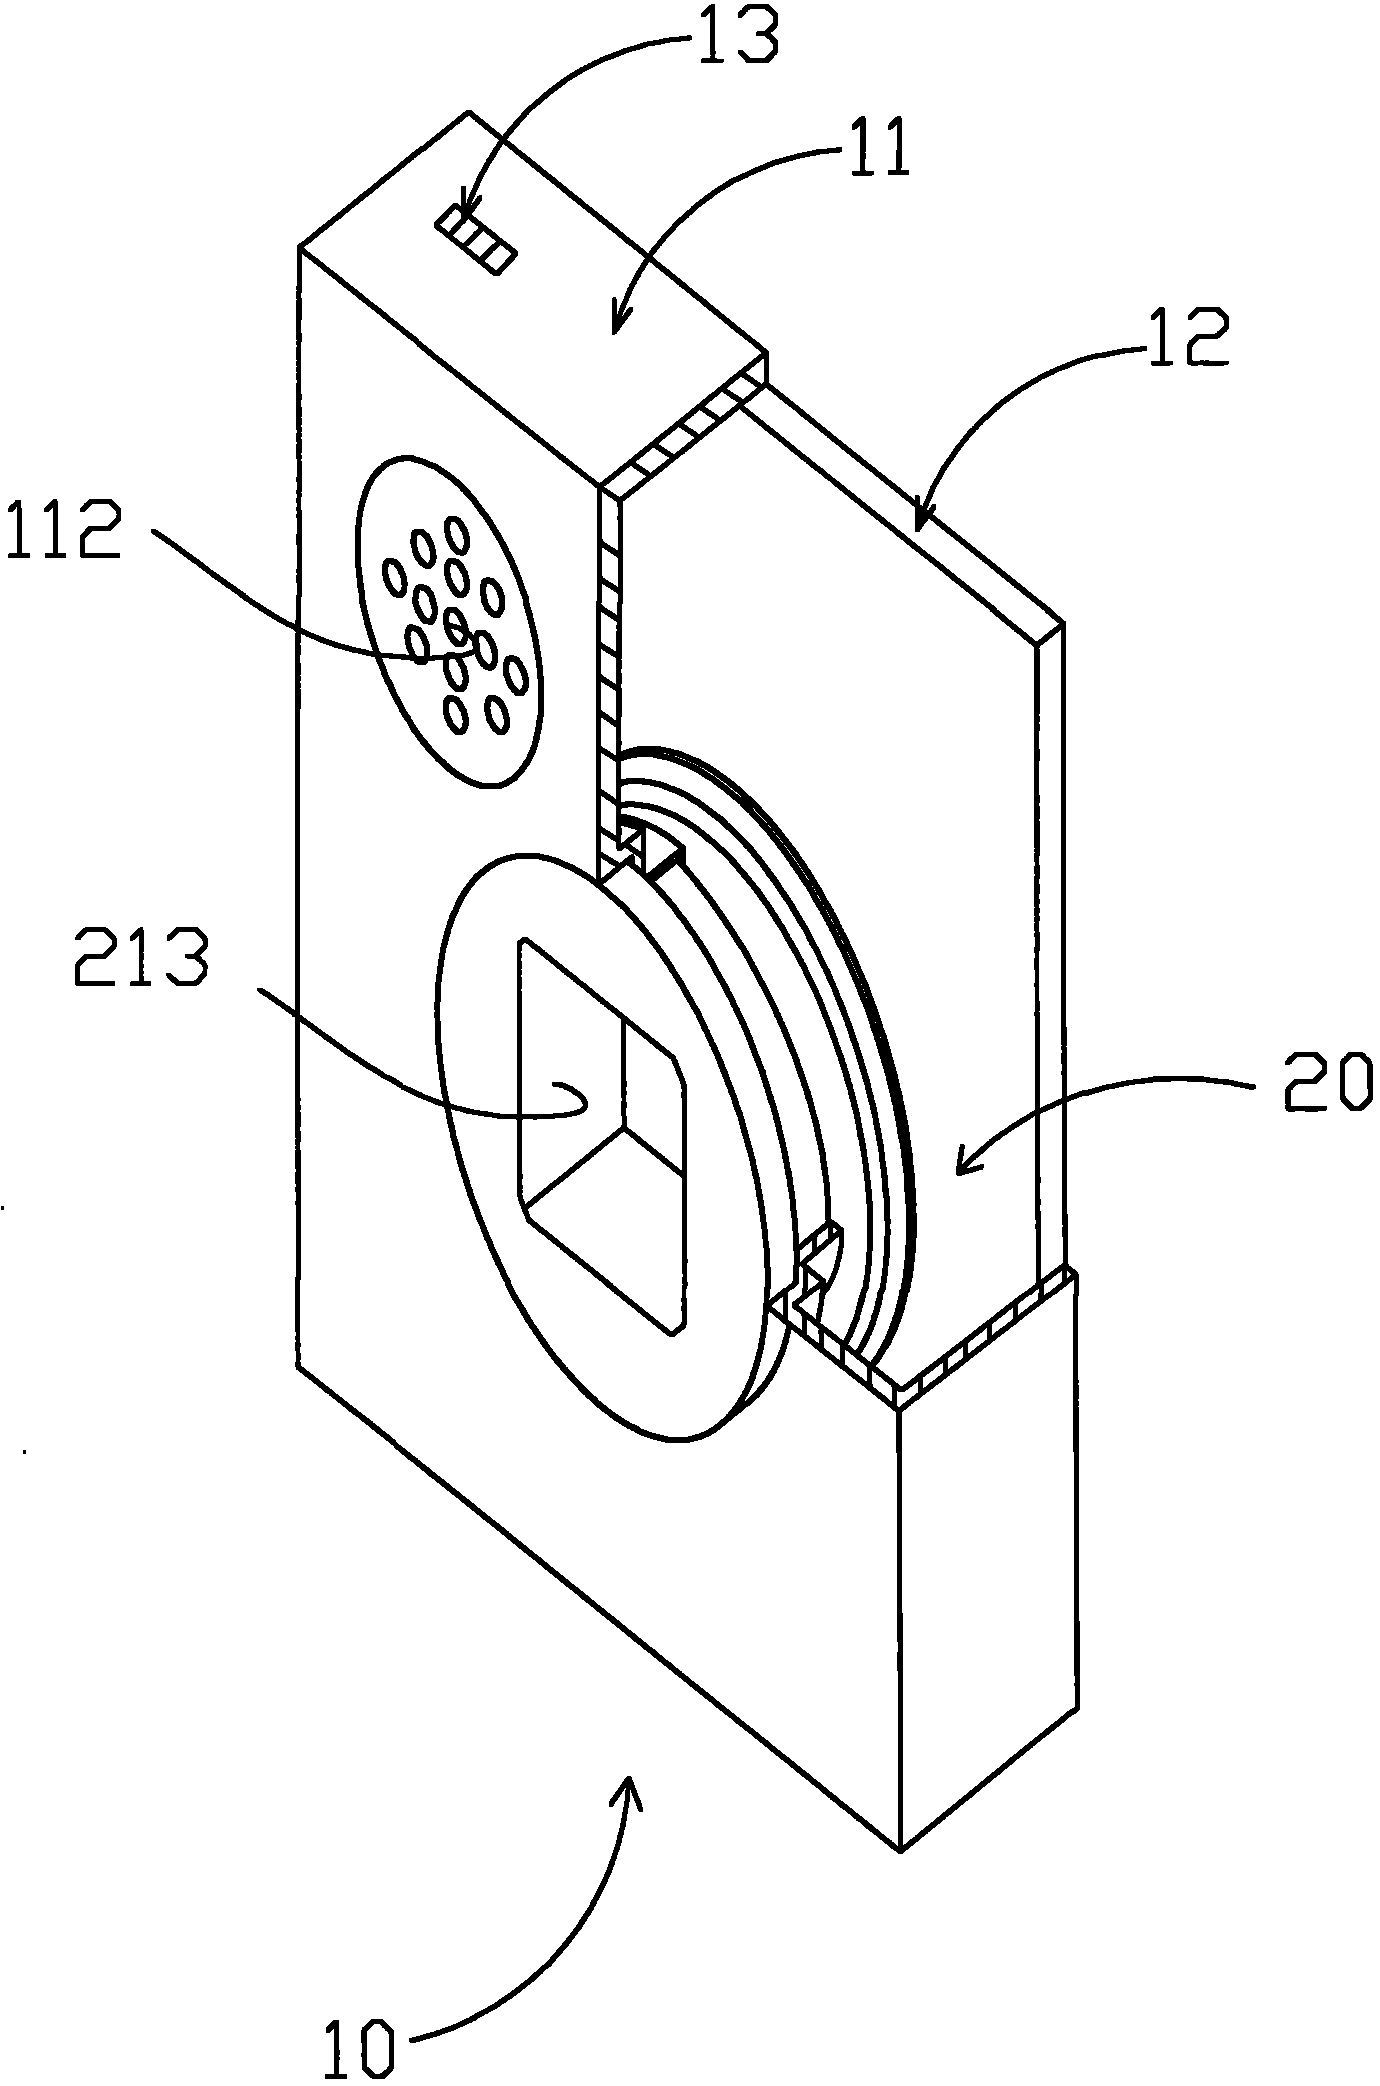 Cover device with rotary palm PC or digital photo and video mechanism